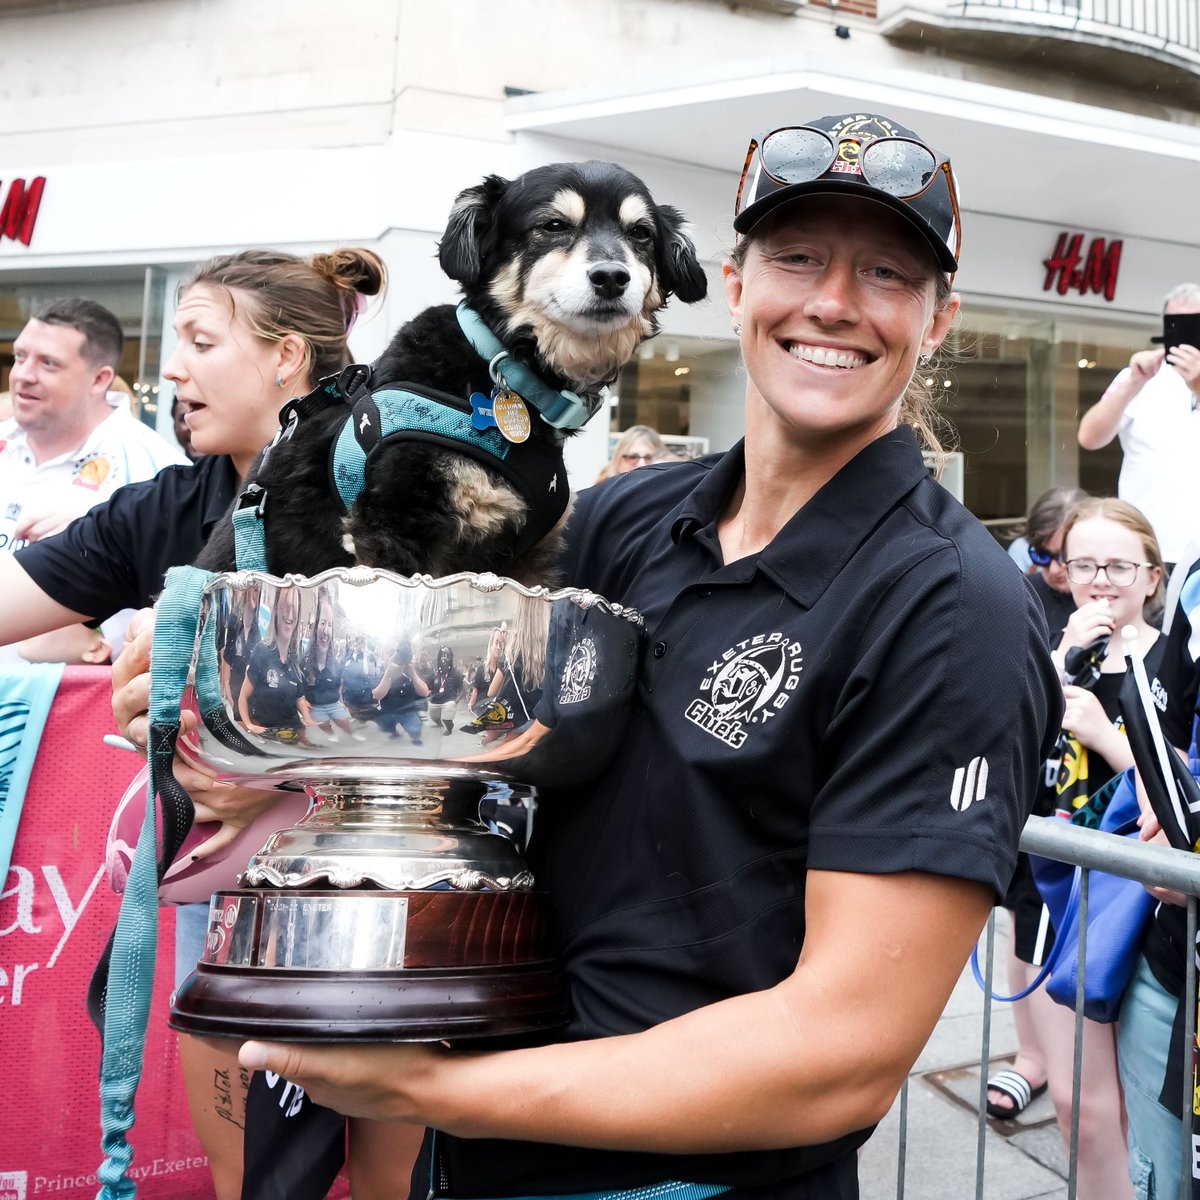 If you need cheering up after yesterday #ChiefsFamily, here's a photo of Kate, holding the Allianz Cup Trophy containing her Dog! 😂

(We wanted to think of a clever caption but it's been a tough 24 hours at the end of a long season 🥱😴)

#JointheJourney | @Premier15s